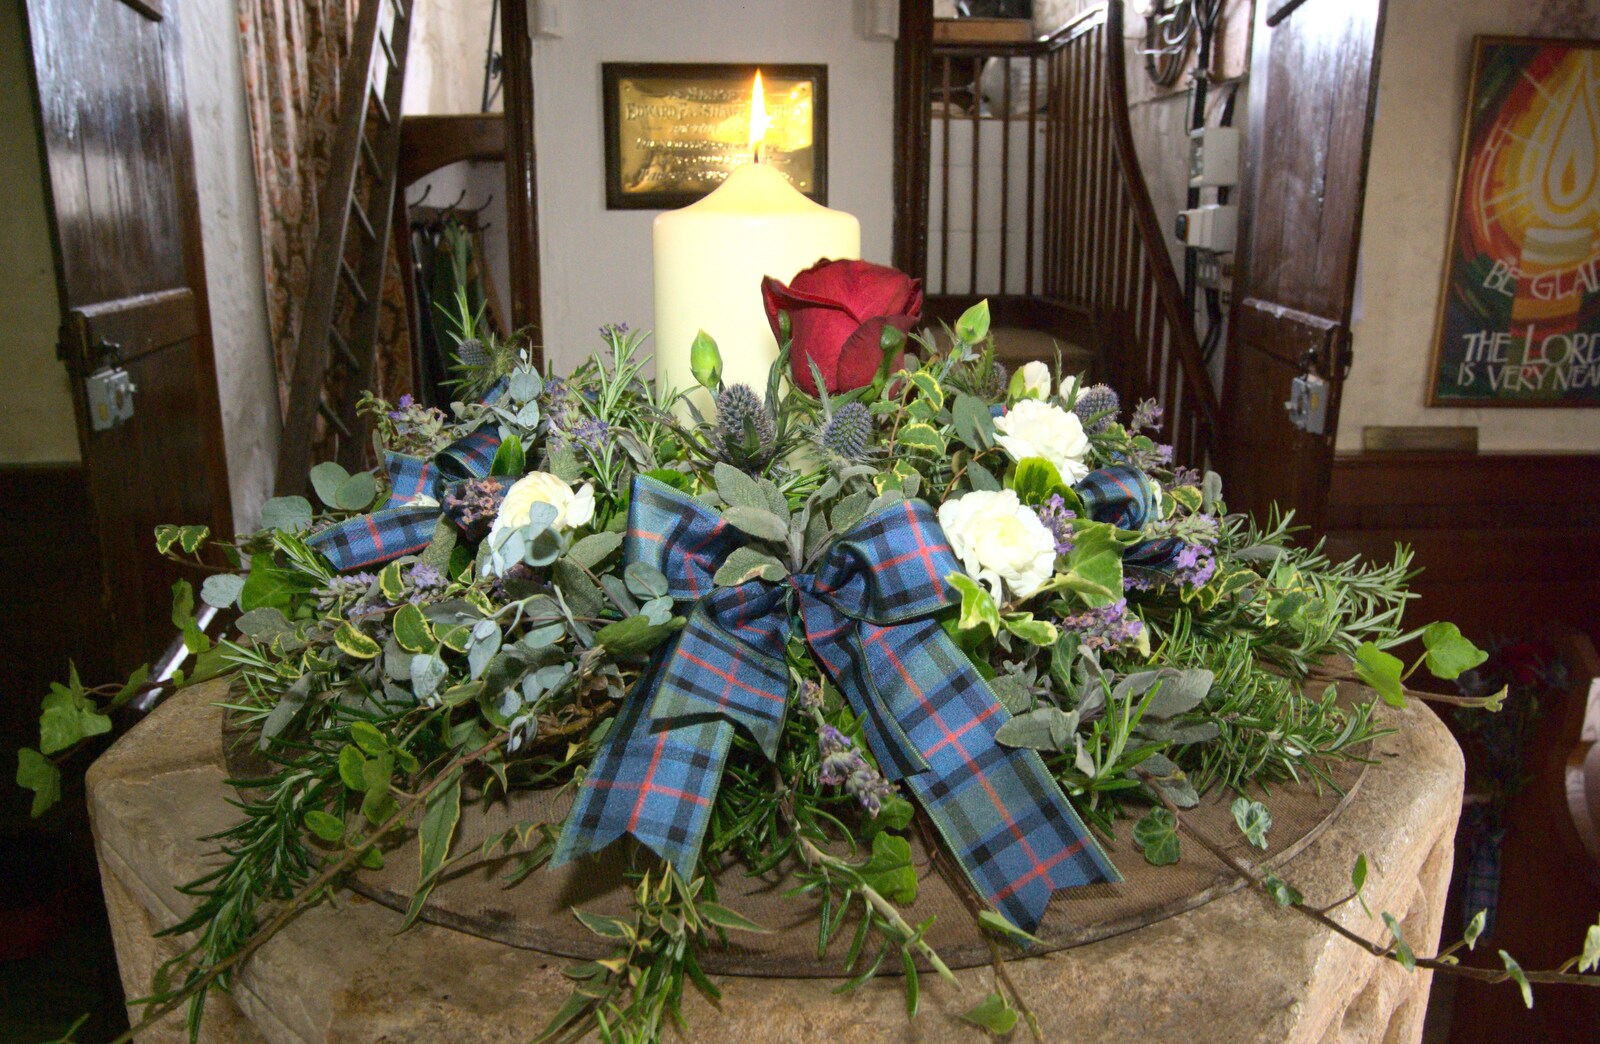 In the church, a candle and a tartan scene from Rob and Wilma's Wedding, Thornham and Thrandeston, Suffolk - 6th August 2011